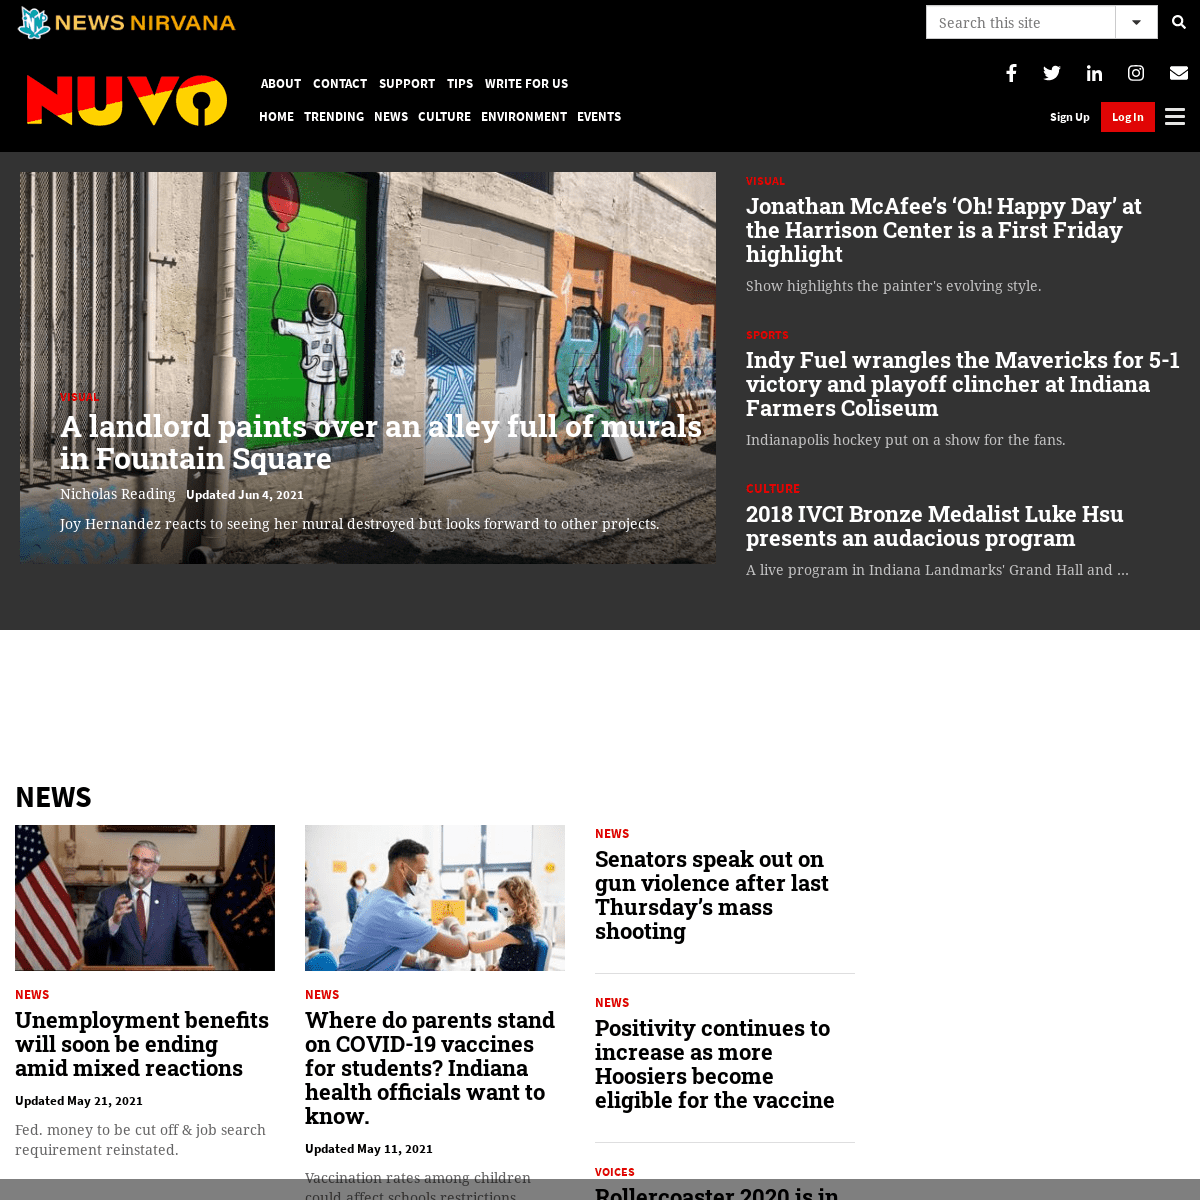 A complete backup of https://nuvo.net